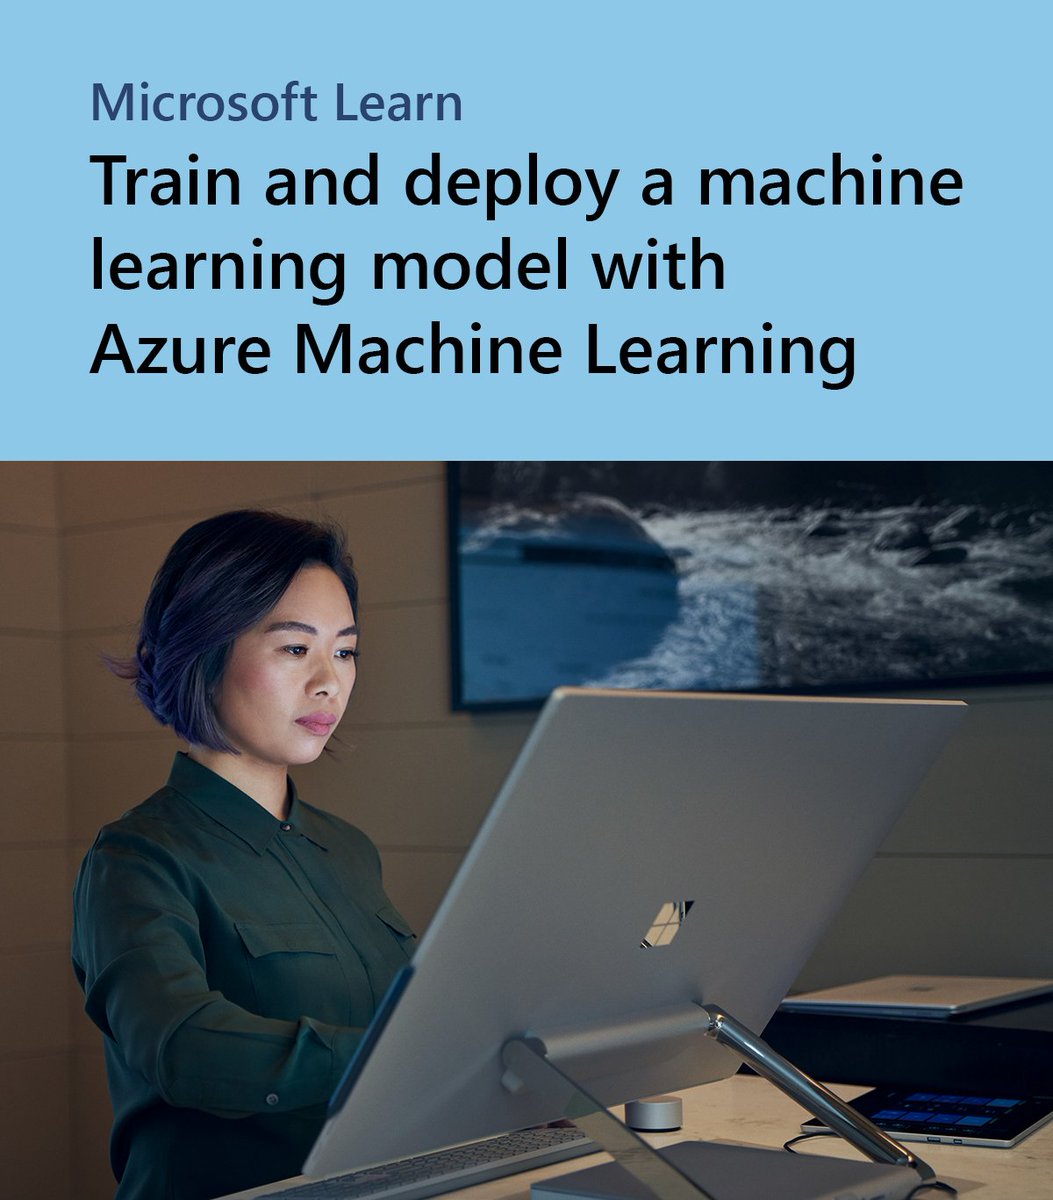 Train and deploy a machine learning model with #Azure Machine Learning. This free learning path will teach you how to set up your workspace, train learning models, and deploy them. #AI msft.it/6017cNmvX